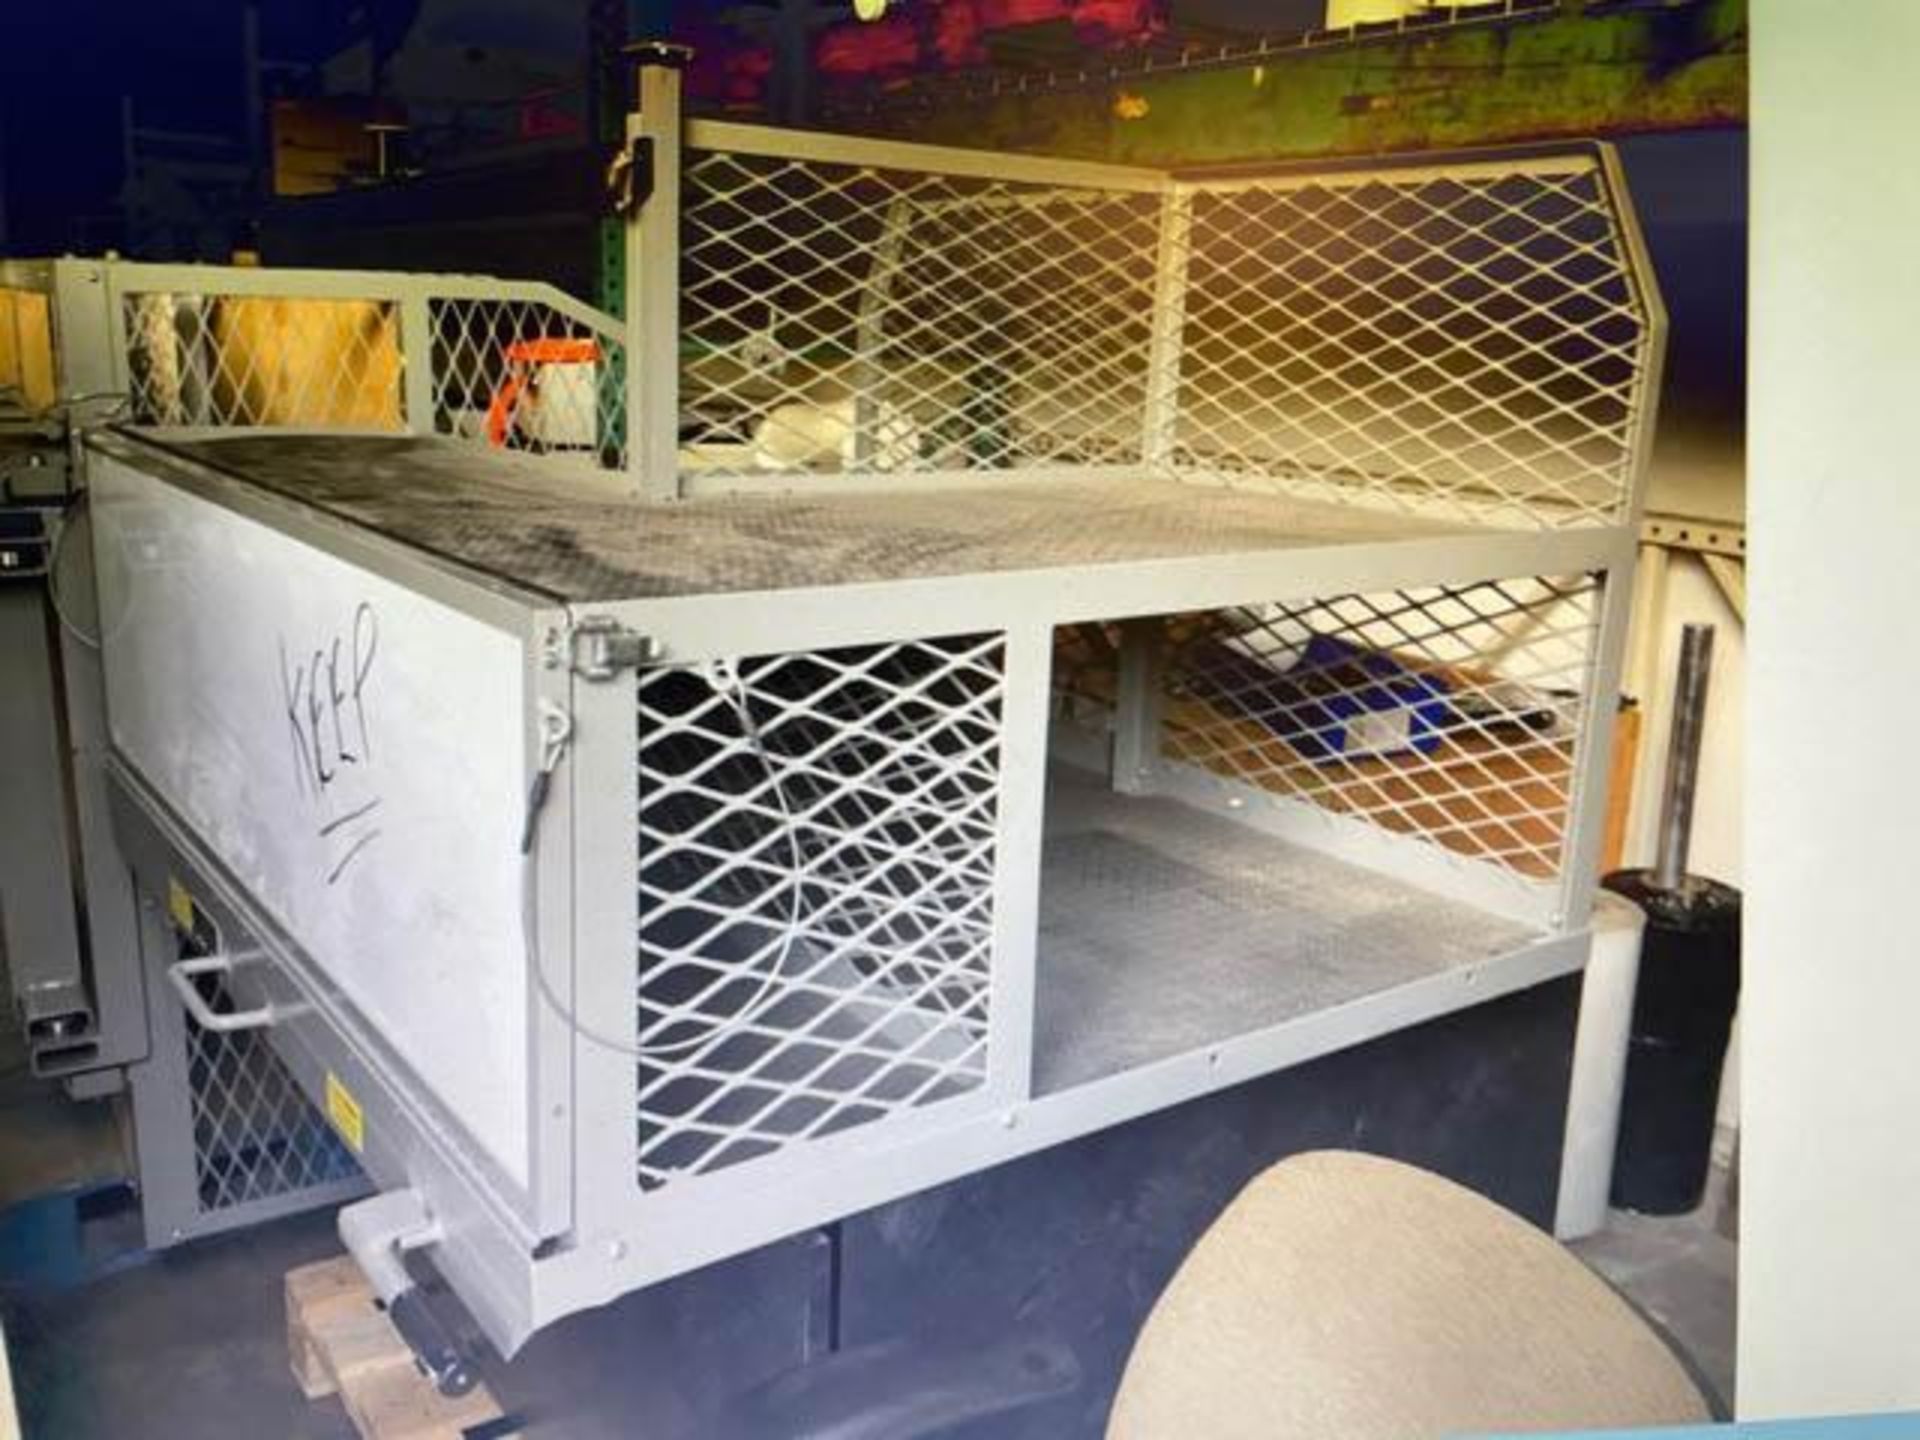 Extendo Bed 800lb Capacity Truck Bed - Located At Surplus MGT. - Ft. Lauderdale